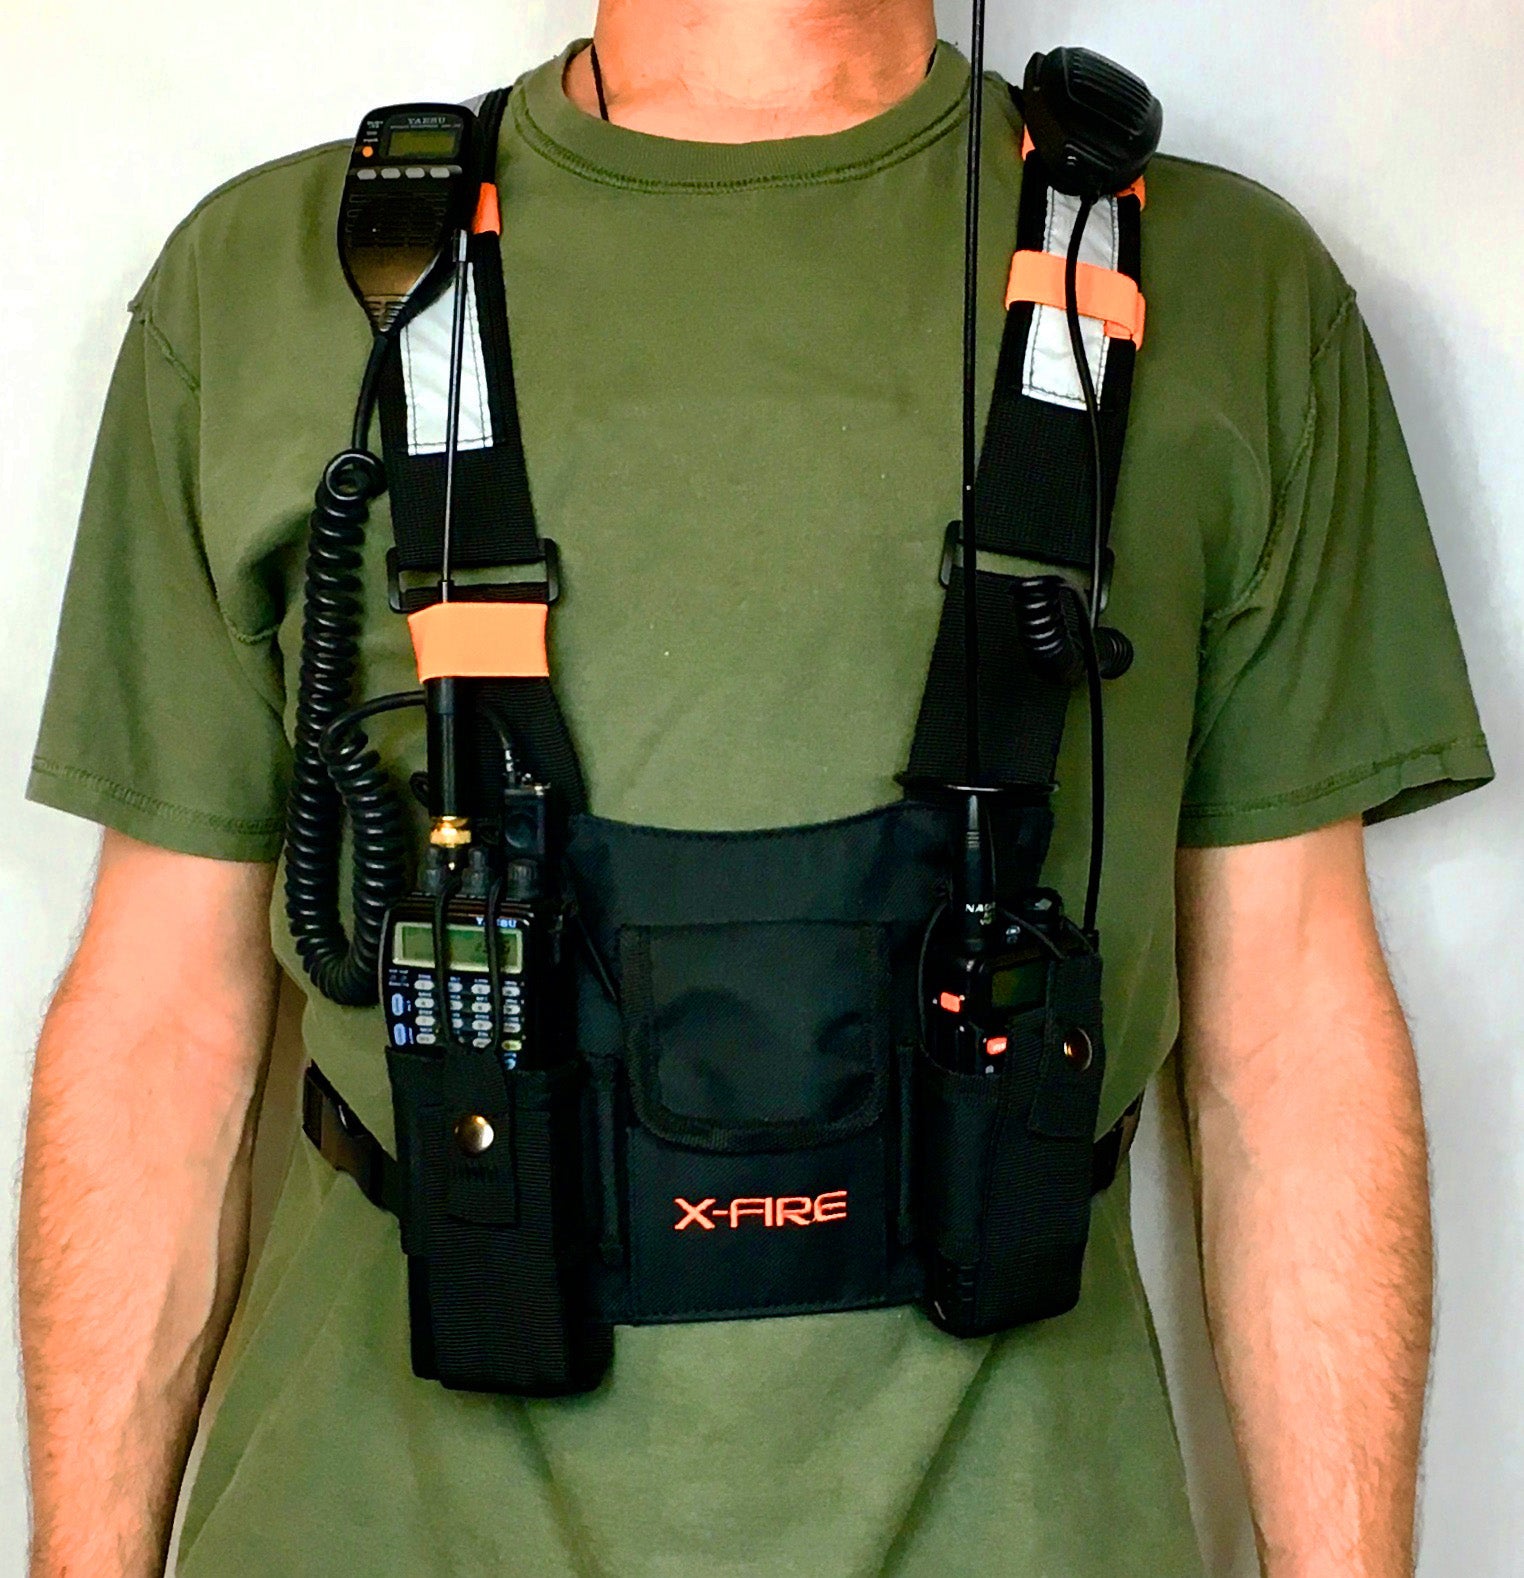 X-FIRE® Dual Portable Radio Chest Rig Harness for Two-Way Radios w